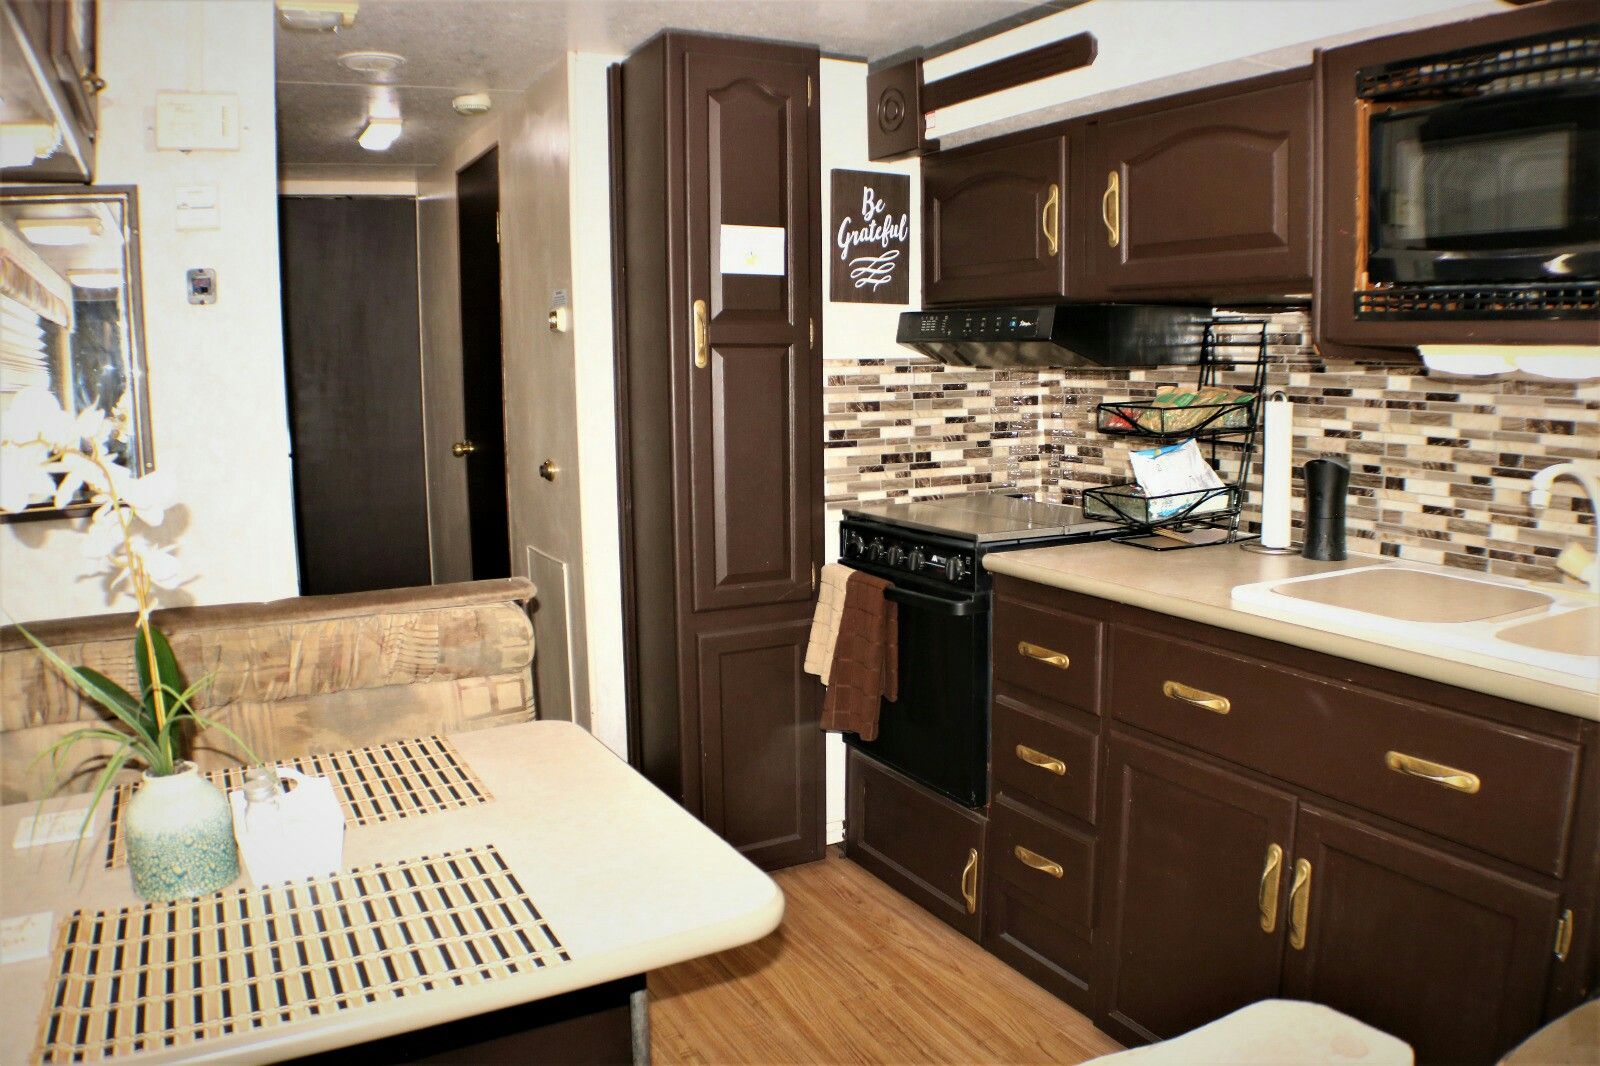 MOTOR HOME FOR SALE! AMAZING DEAL!